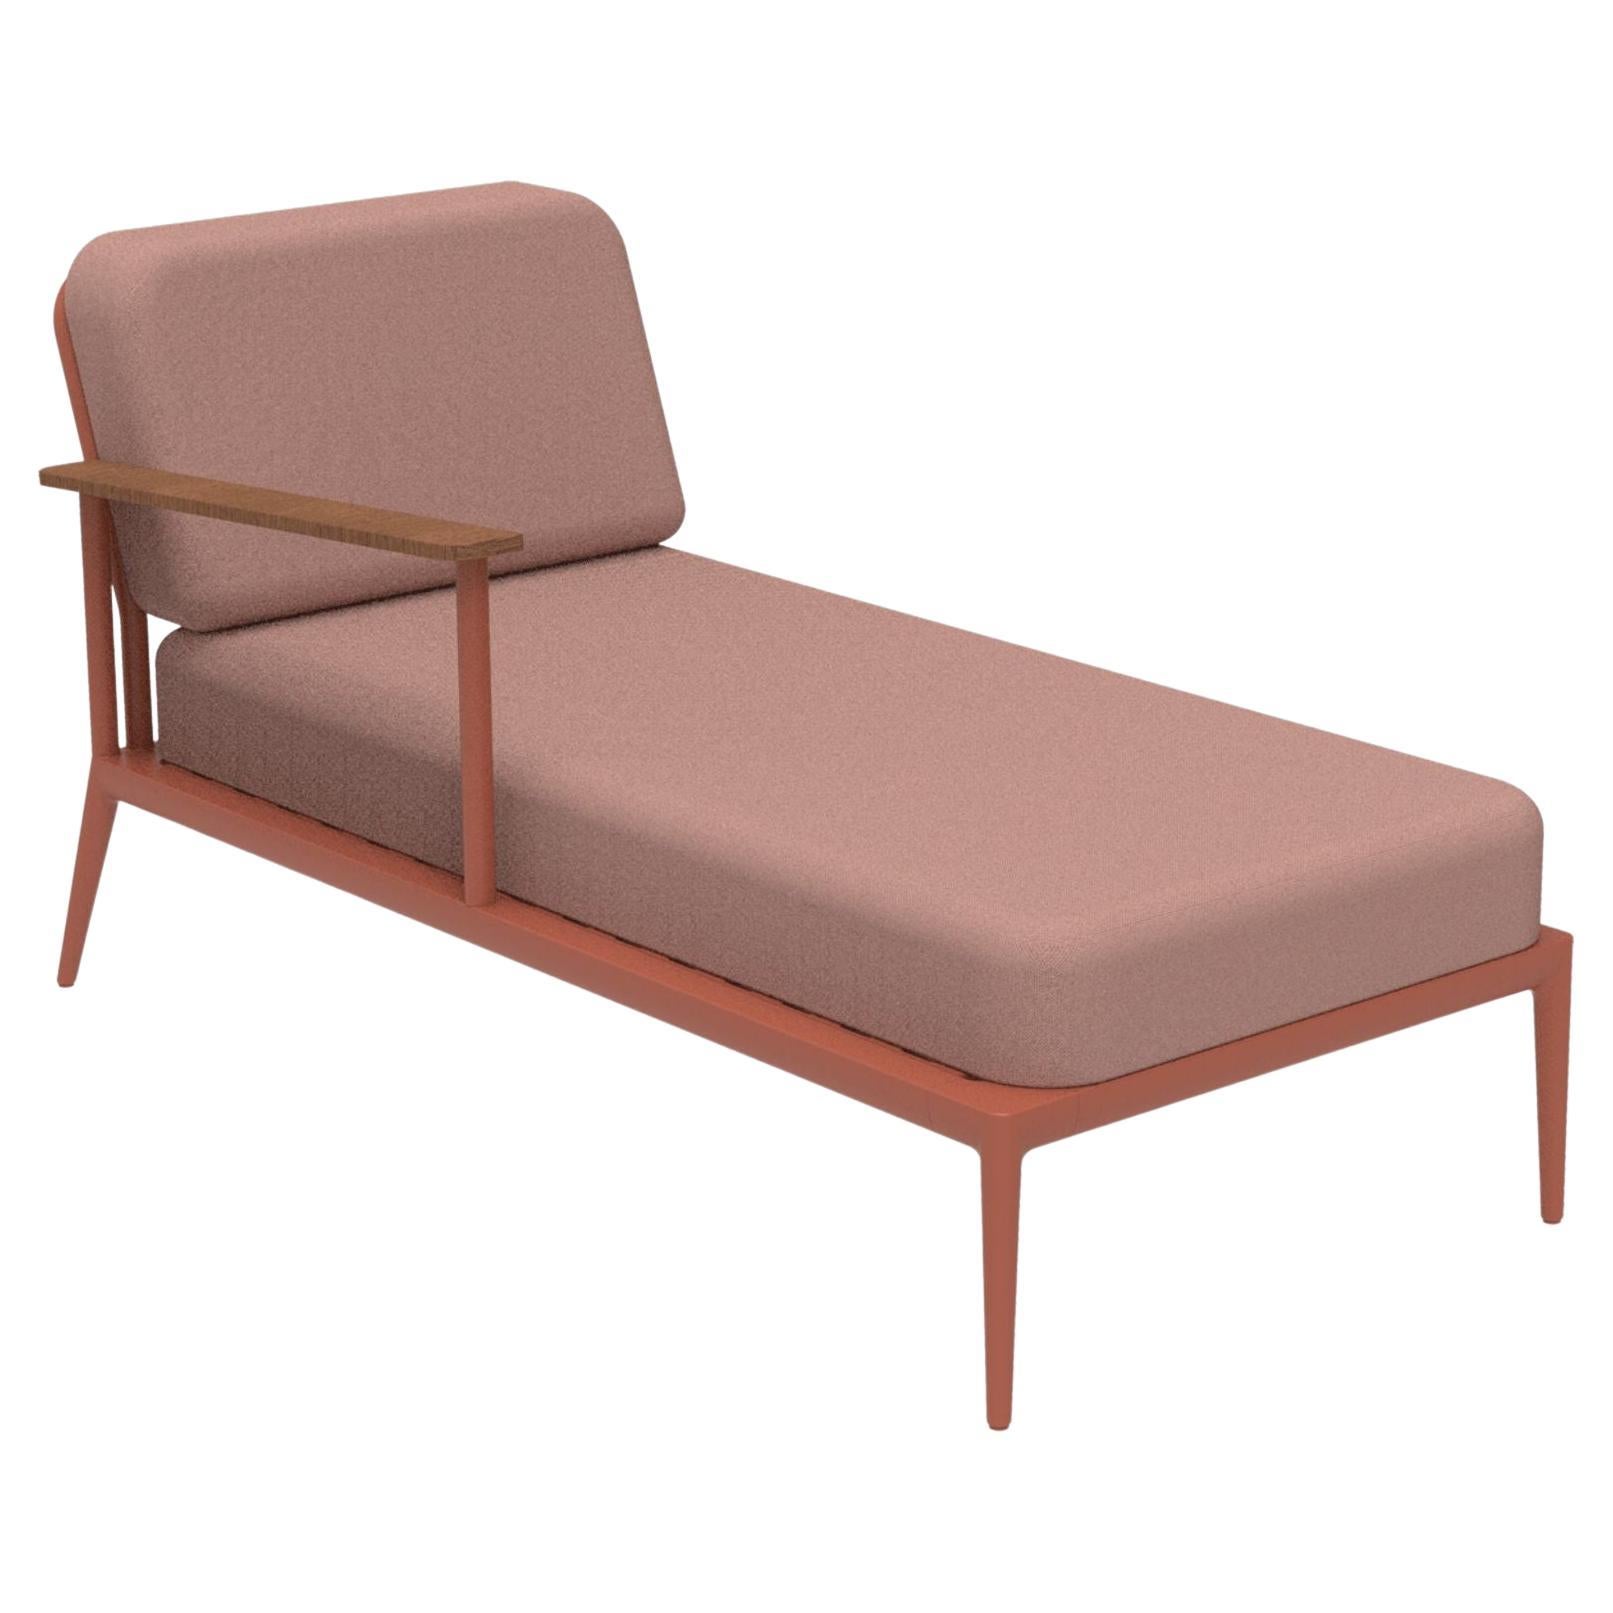 Nature Salmon Right Chaise Lounge by Mowee